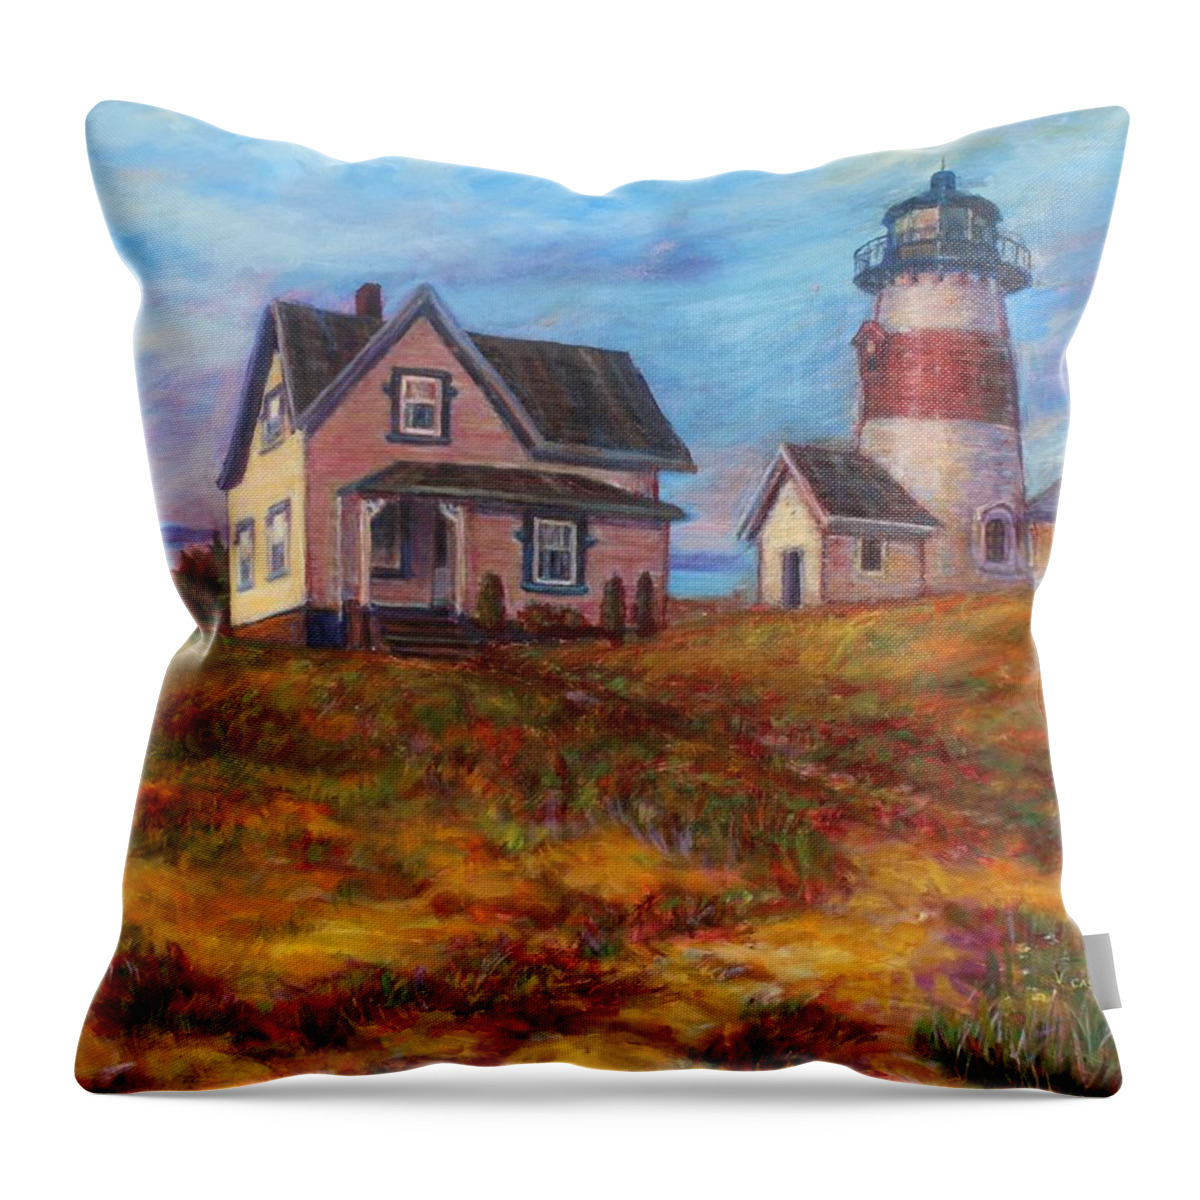 Coastal Scene Throw Pillow featuring the painting Lighthouse On The New England Coast by Veronica Cassell vaz